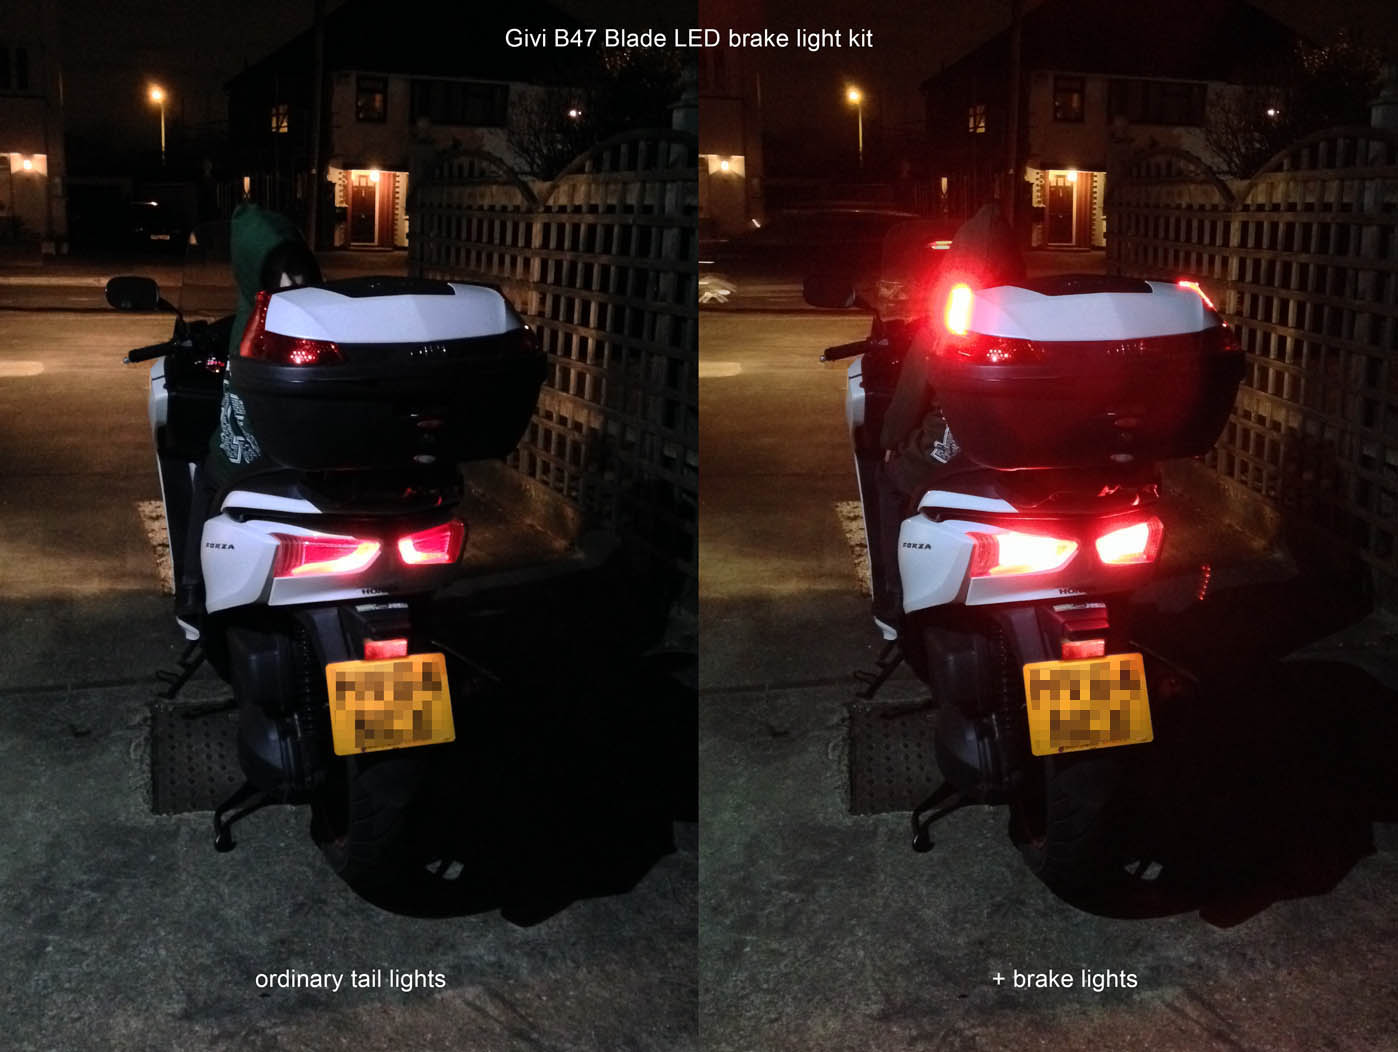 Slight angle showing how the side mounting position of the Givi brake lights means that you can easily lose sight of one of them.